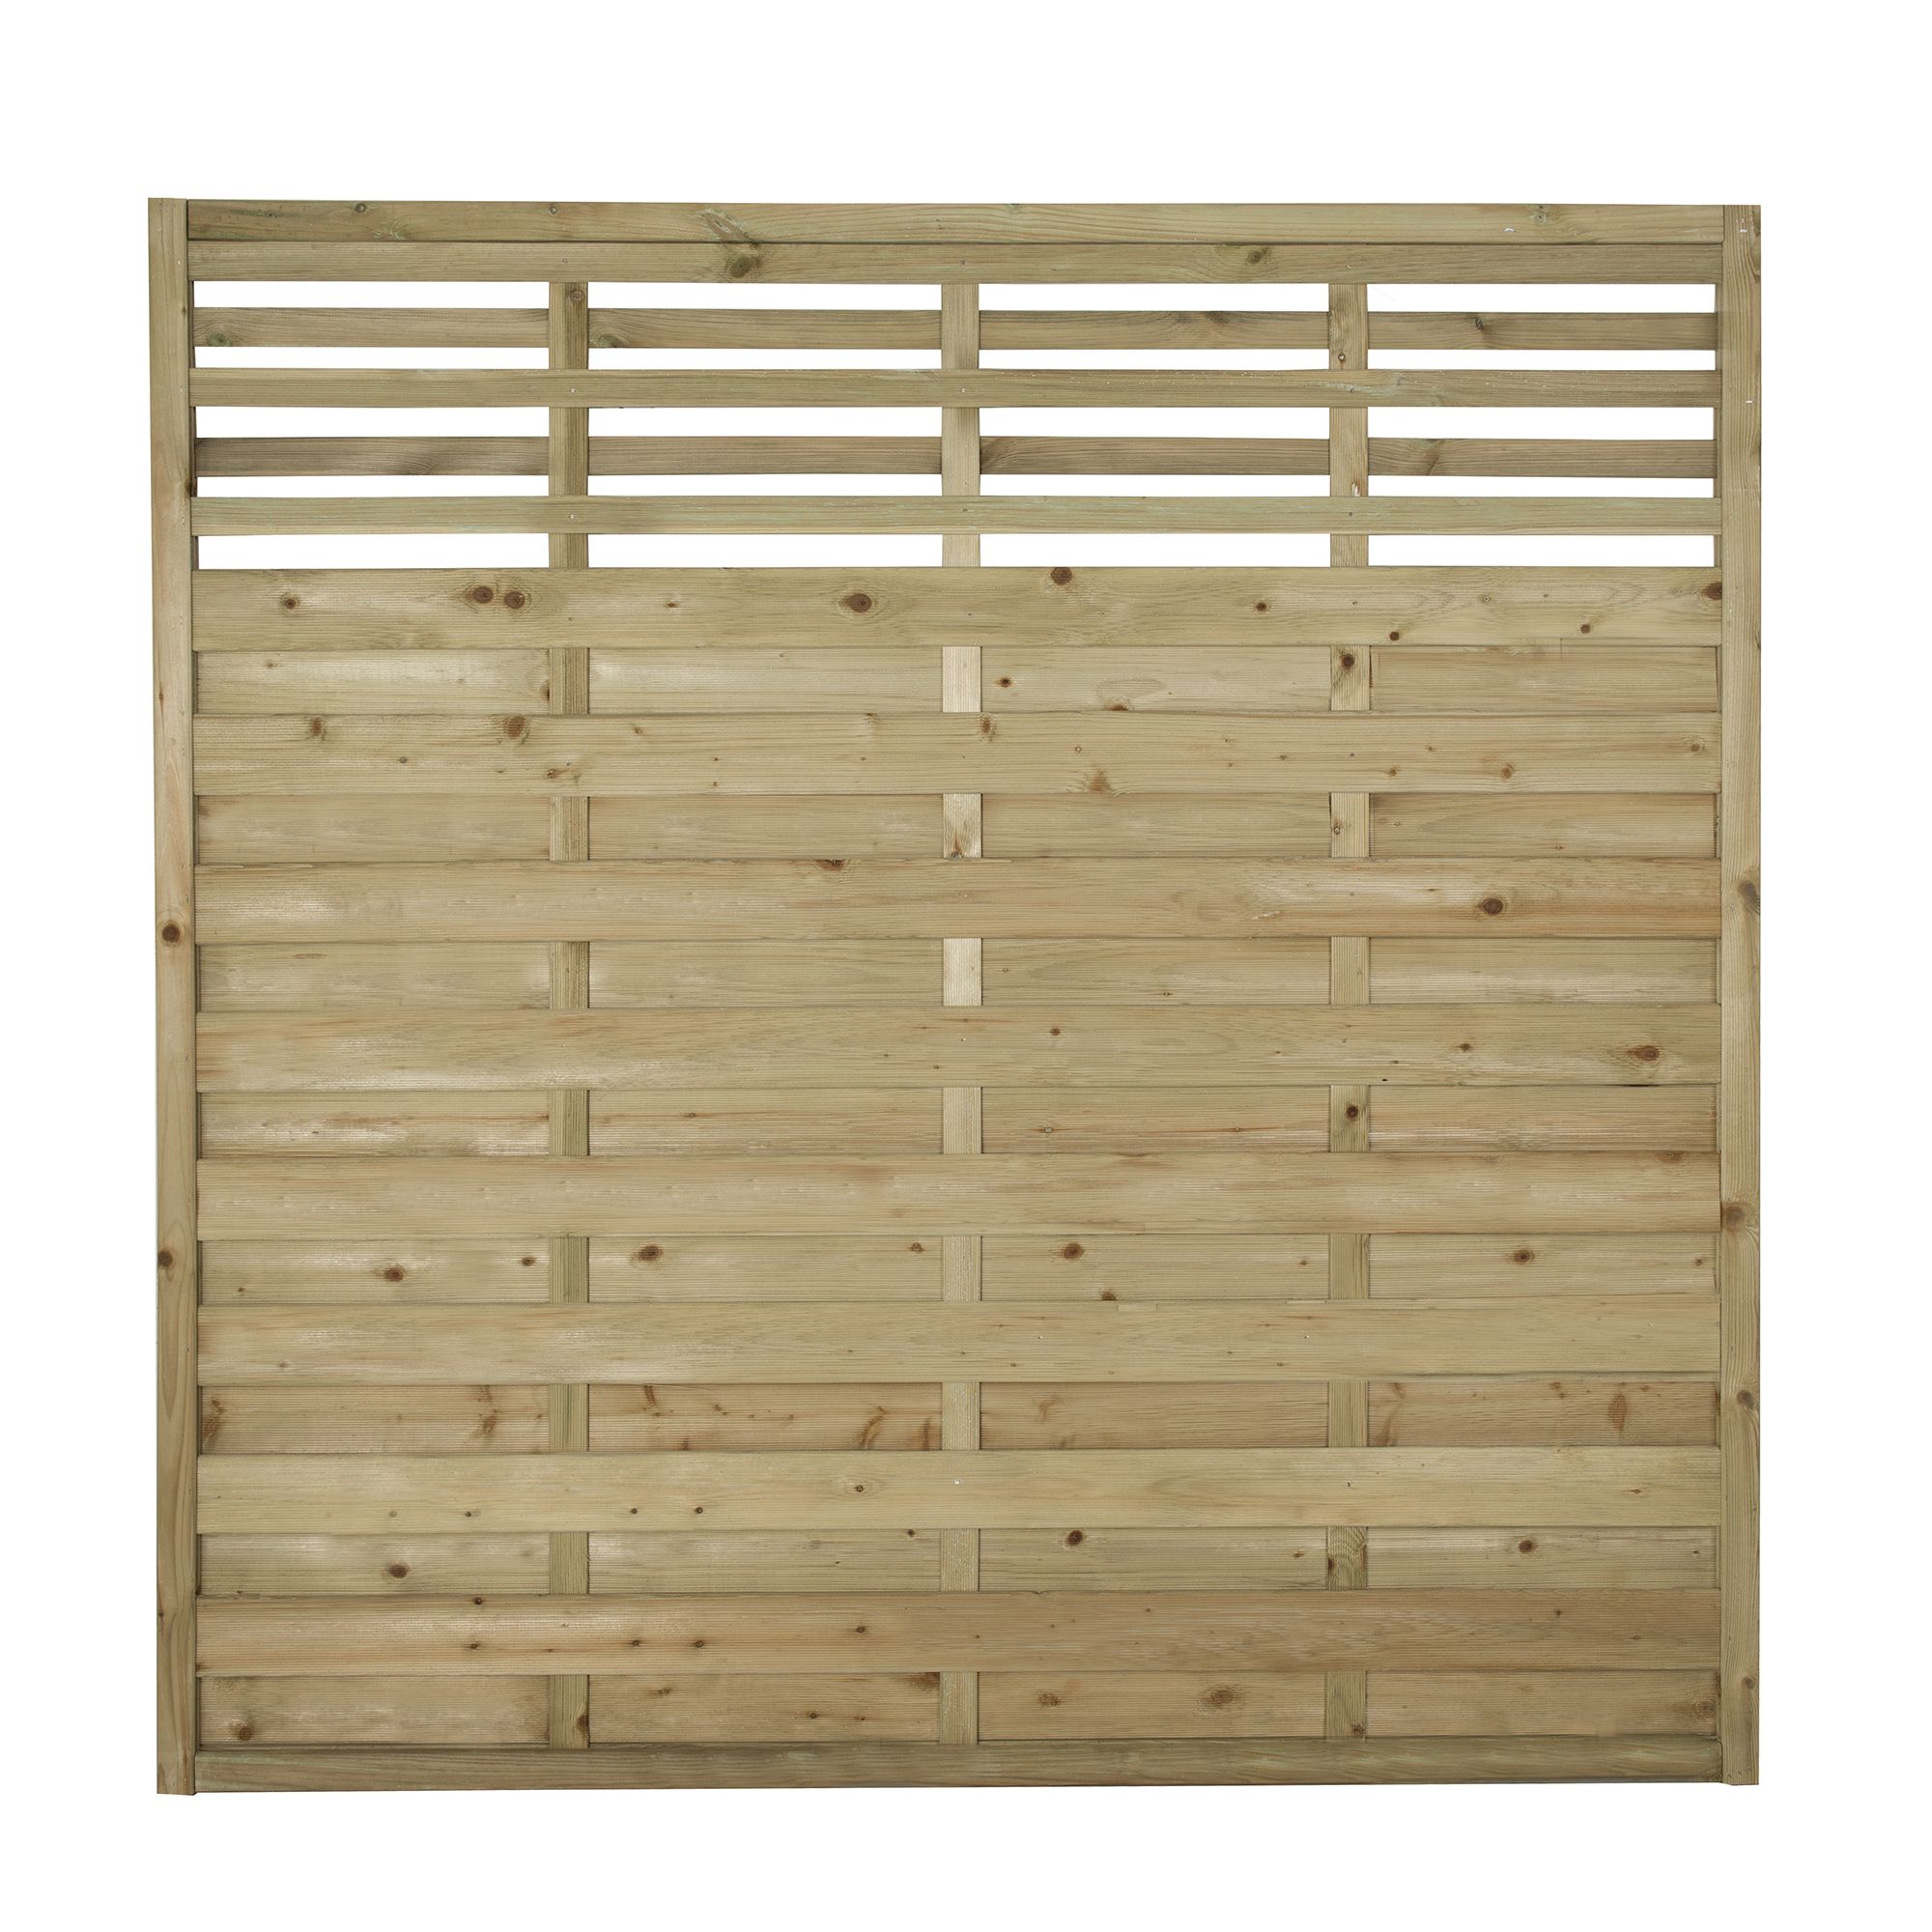 Forest Garden Contemporary Slatted Pressure treated Wooden Fence panel (W)1.8m (H)1.8m, Pack of 10